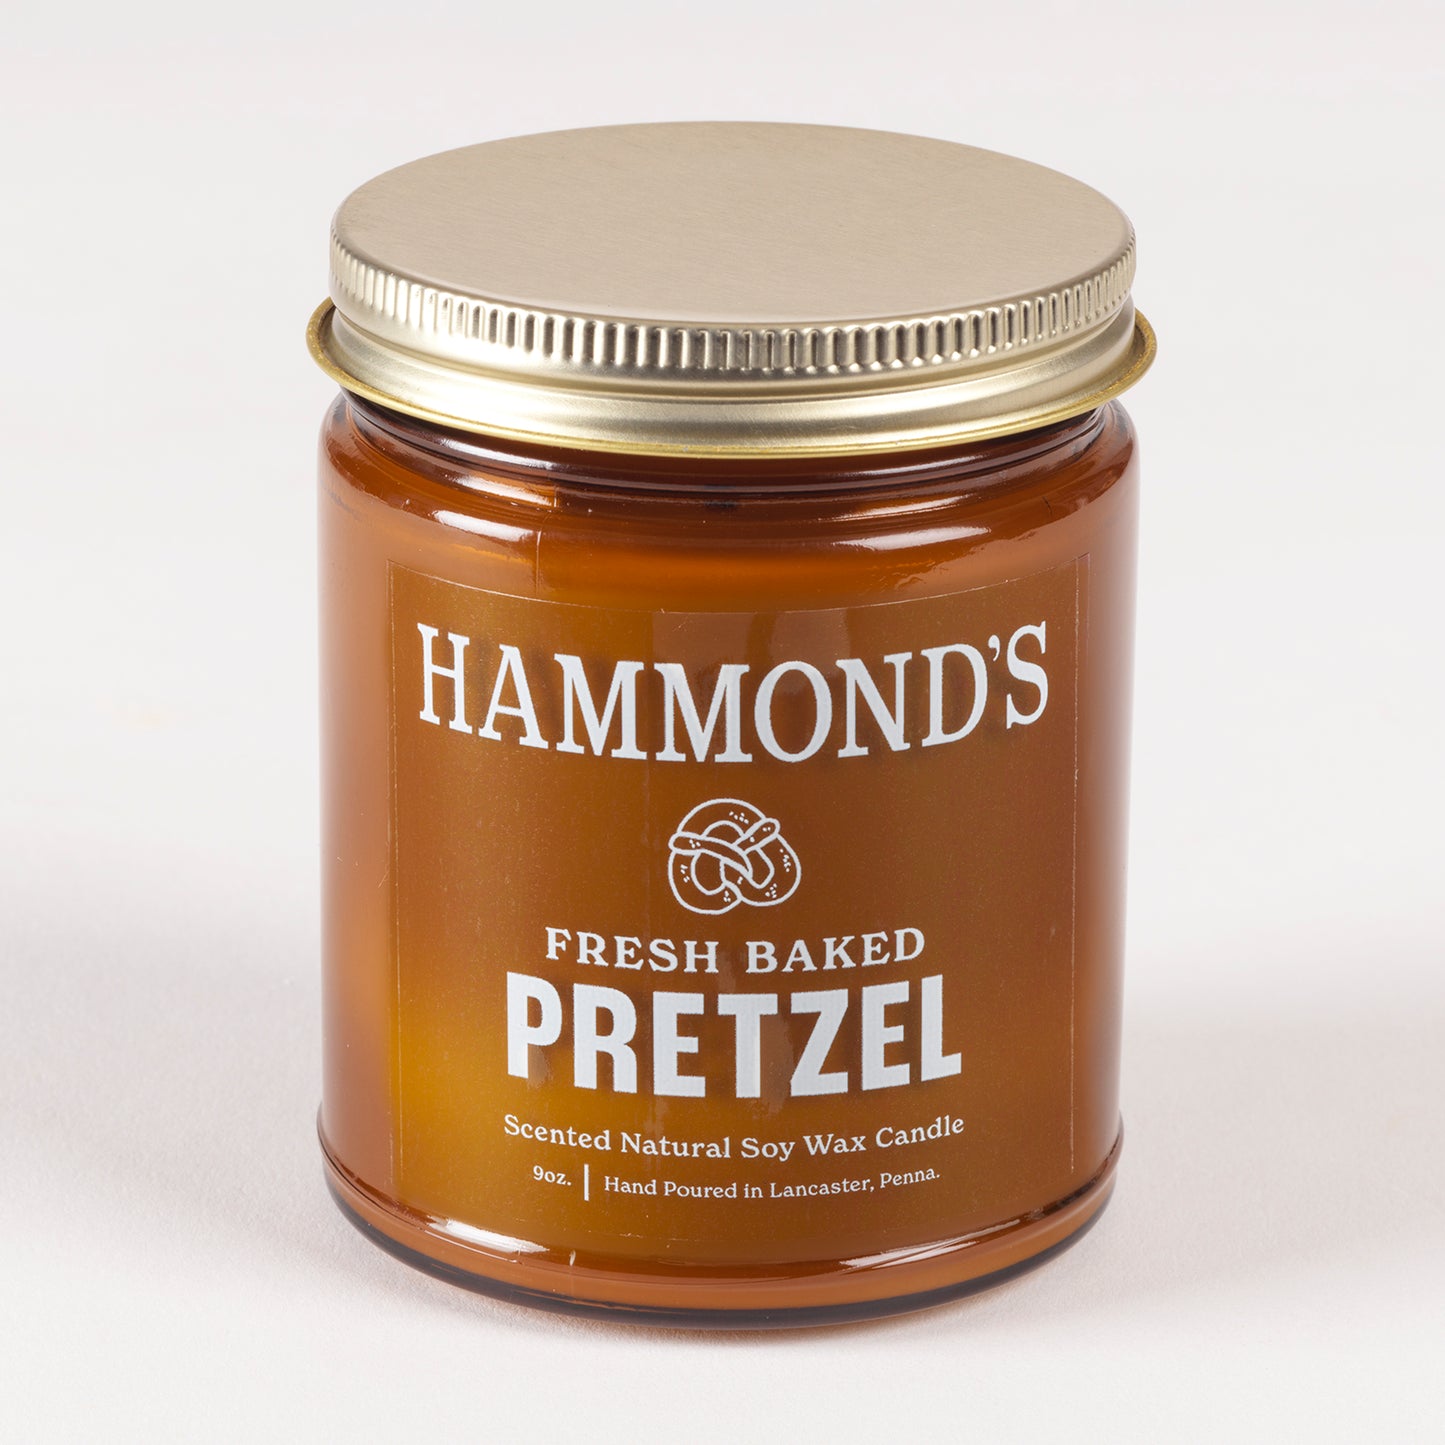 Hammond's Fresh Baked Pretzel Scented Candle